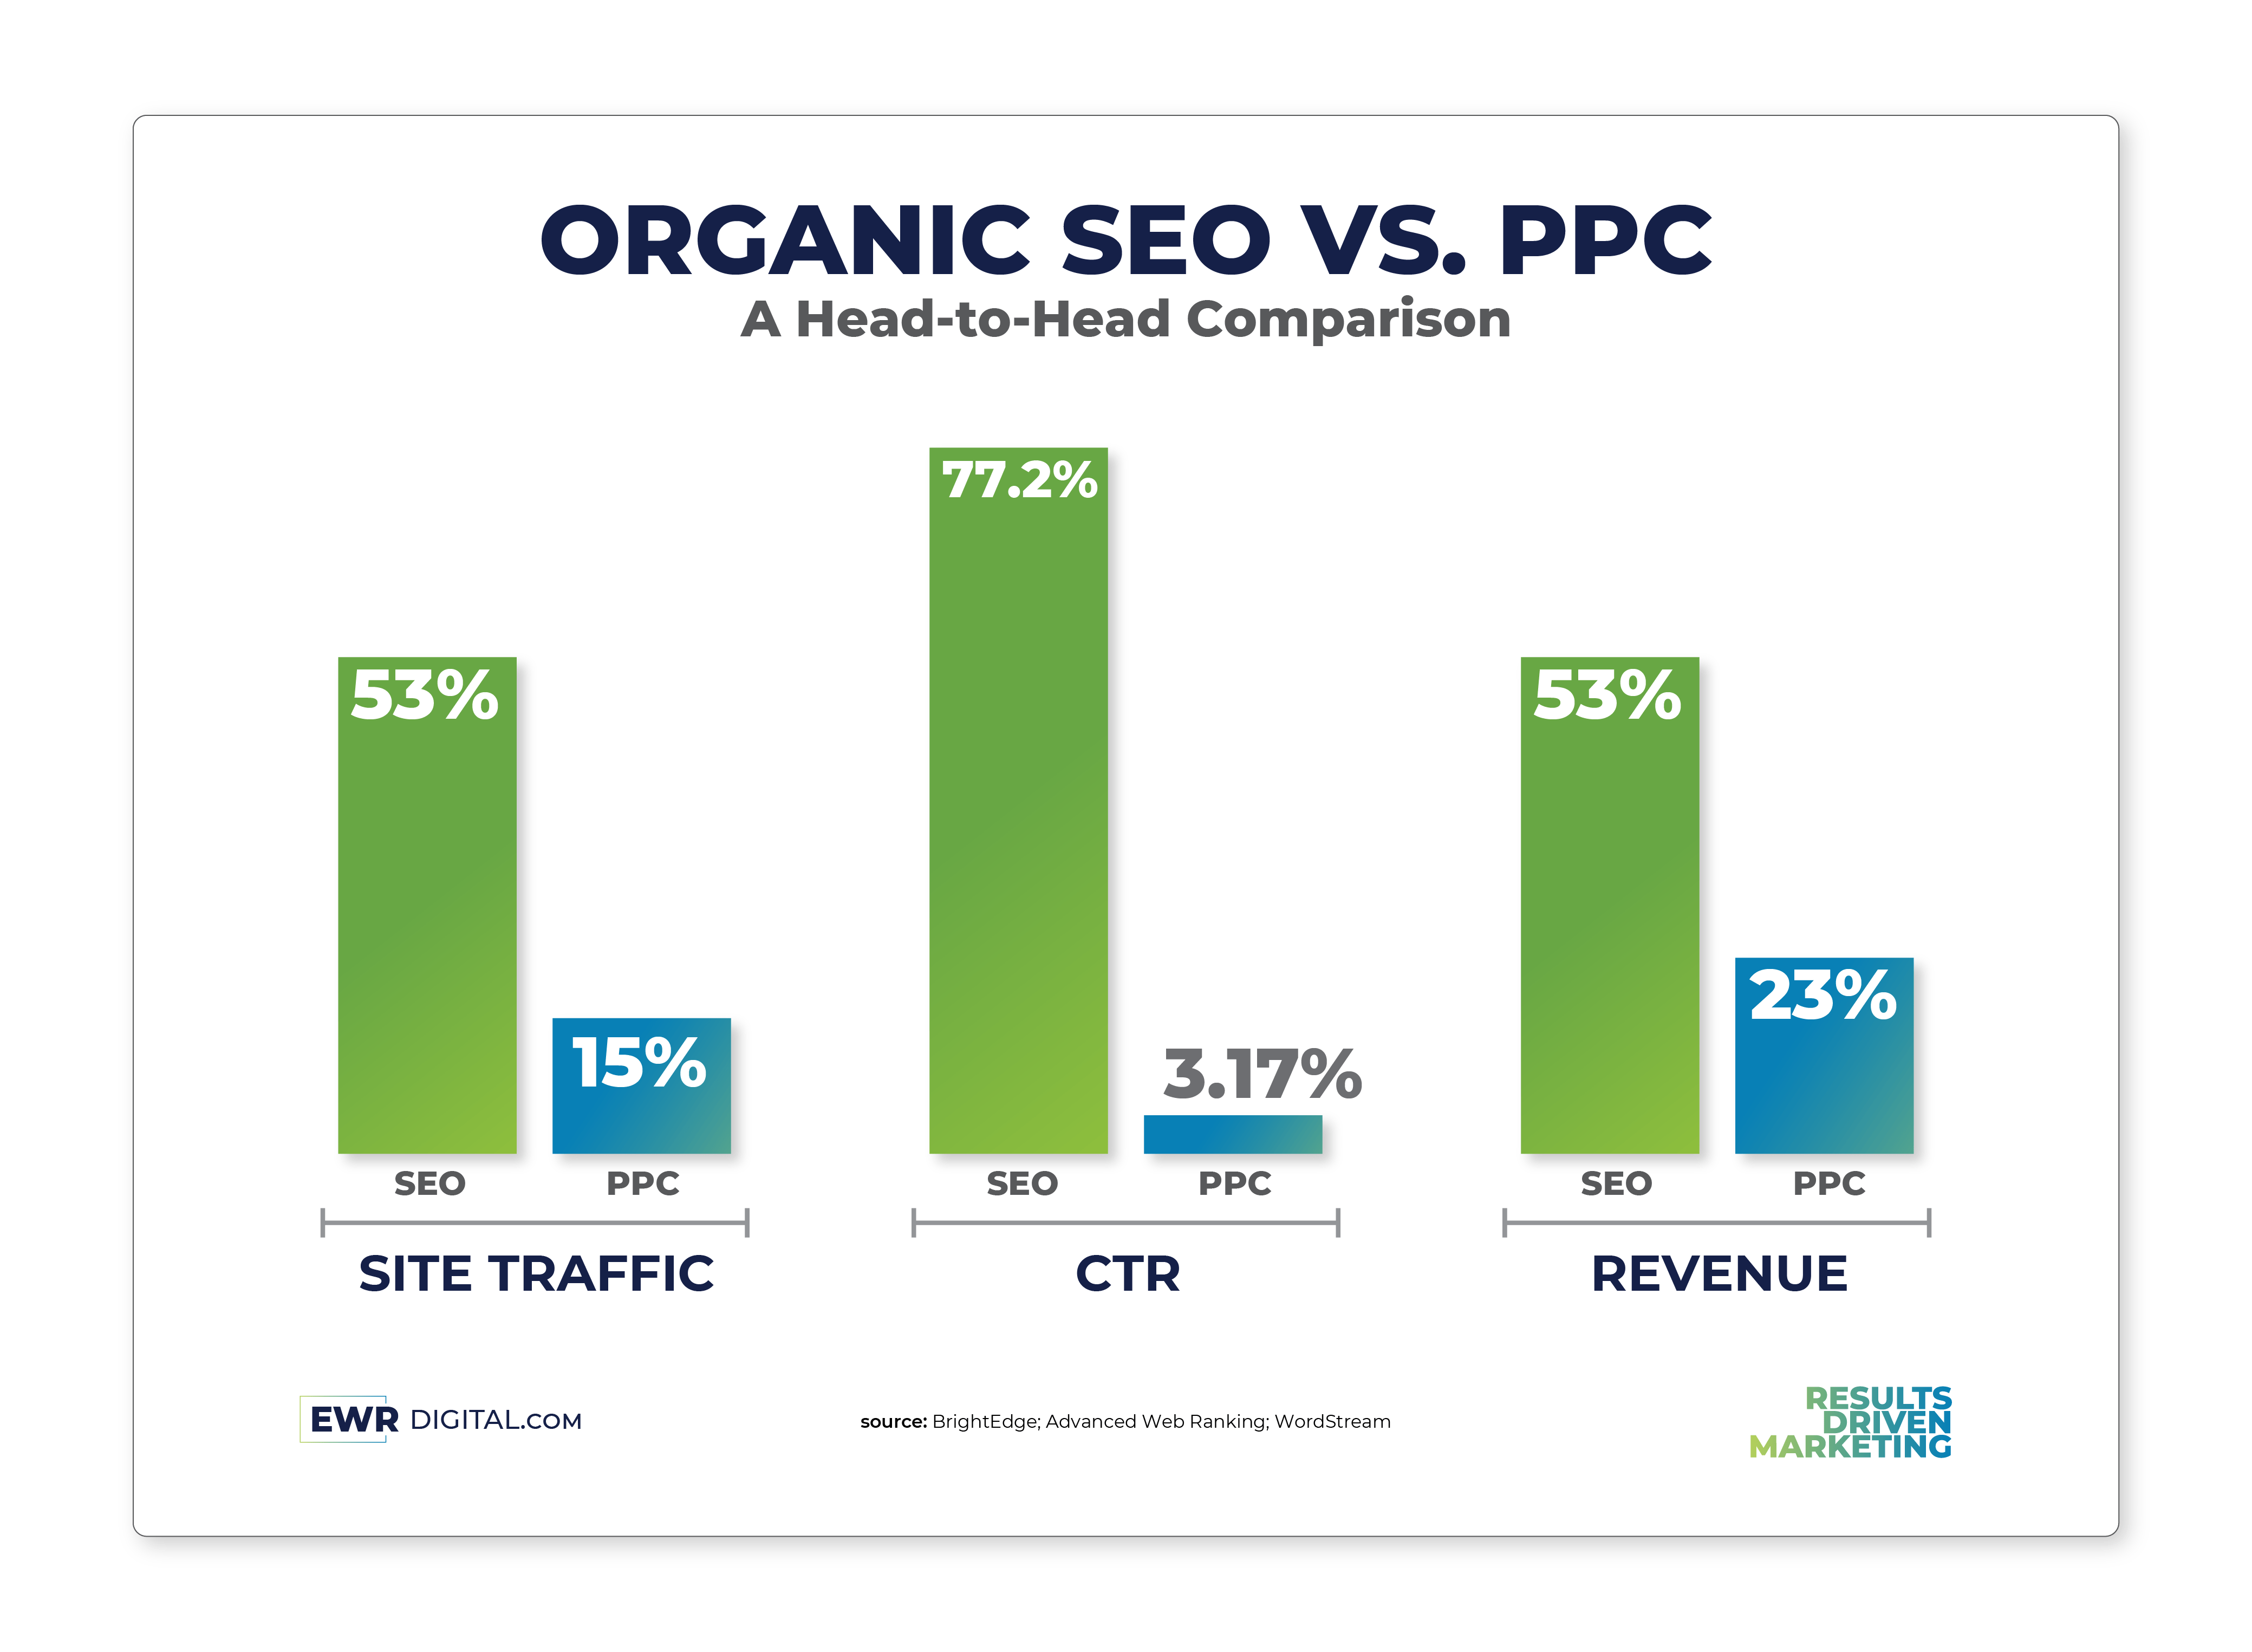 Bar graphs comparing organic SEO and PPC in site traffic, CTR, and revenue.